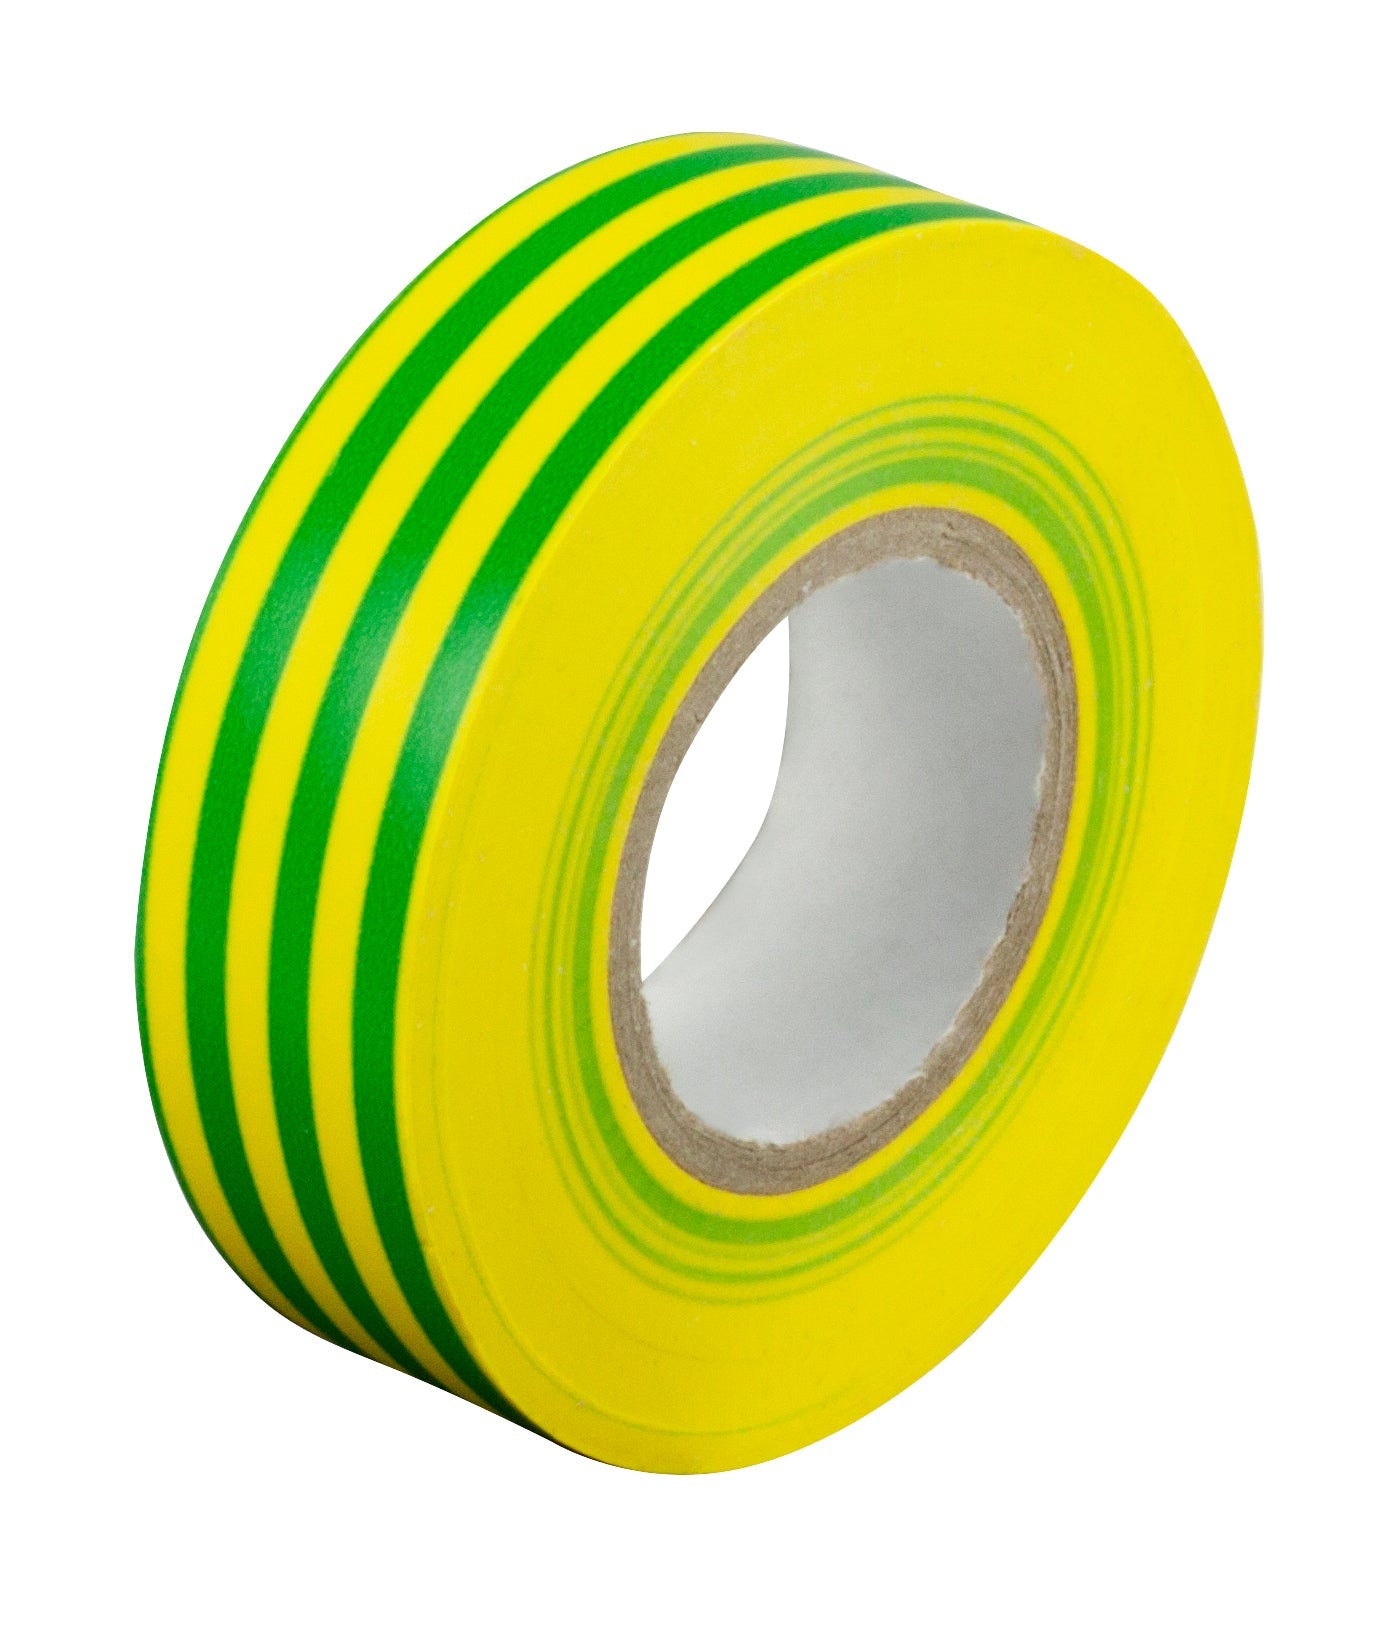 PVC Tape Size: 19mmx20m Roll - Green/Yellow - Pack of 10